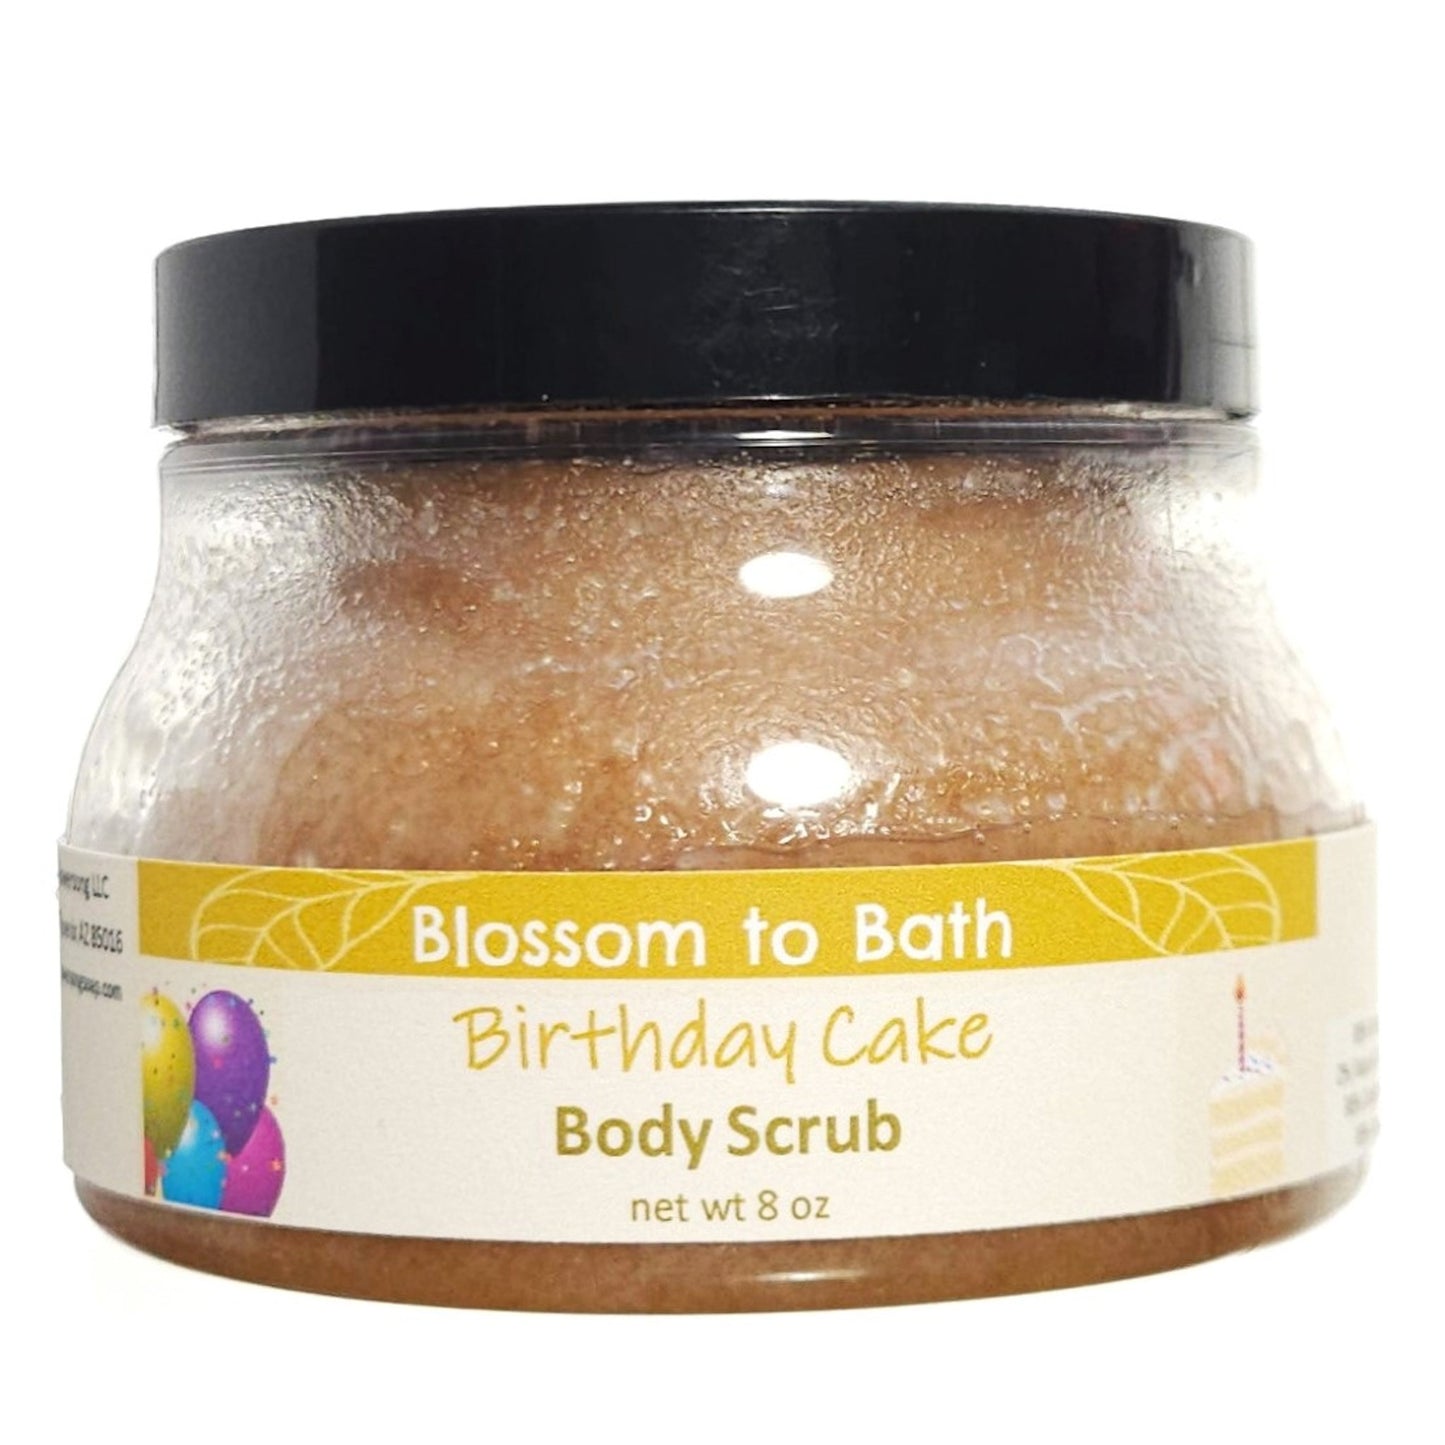 Buy Blossom to Bath Birthday Cake Body Scrub from Flowersong Soap Studio.  Large crystal turbinado sugar plus  rich oils conveniently exfoliate and moisturize in one step  The essence of a vanilla buttercream frosted birthday cake.